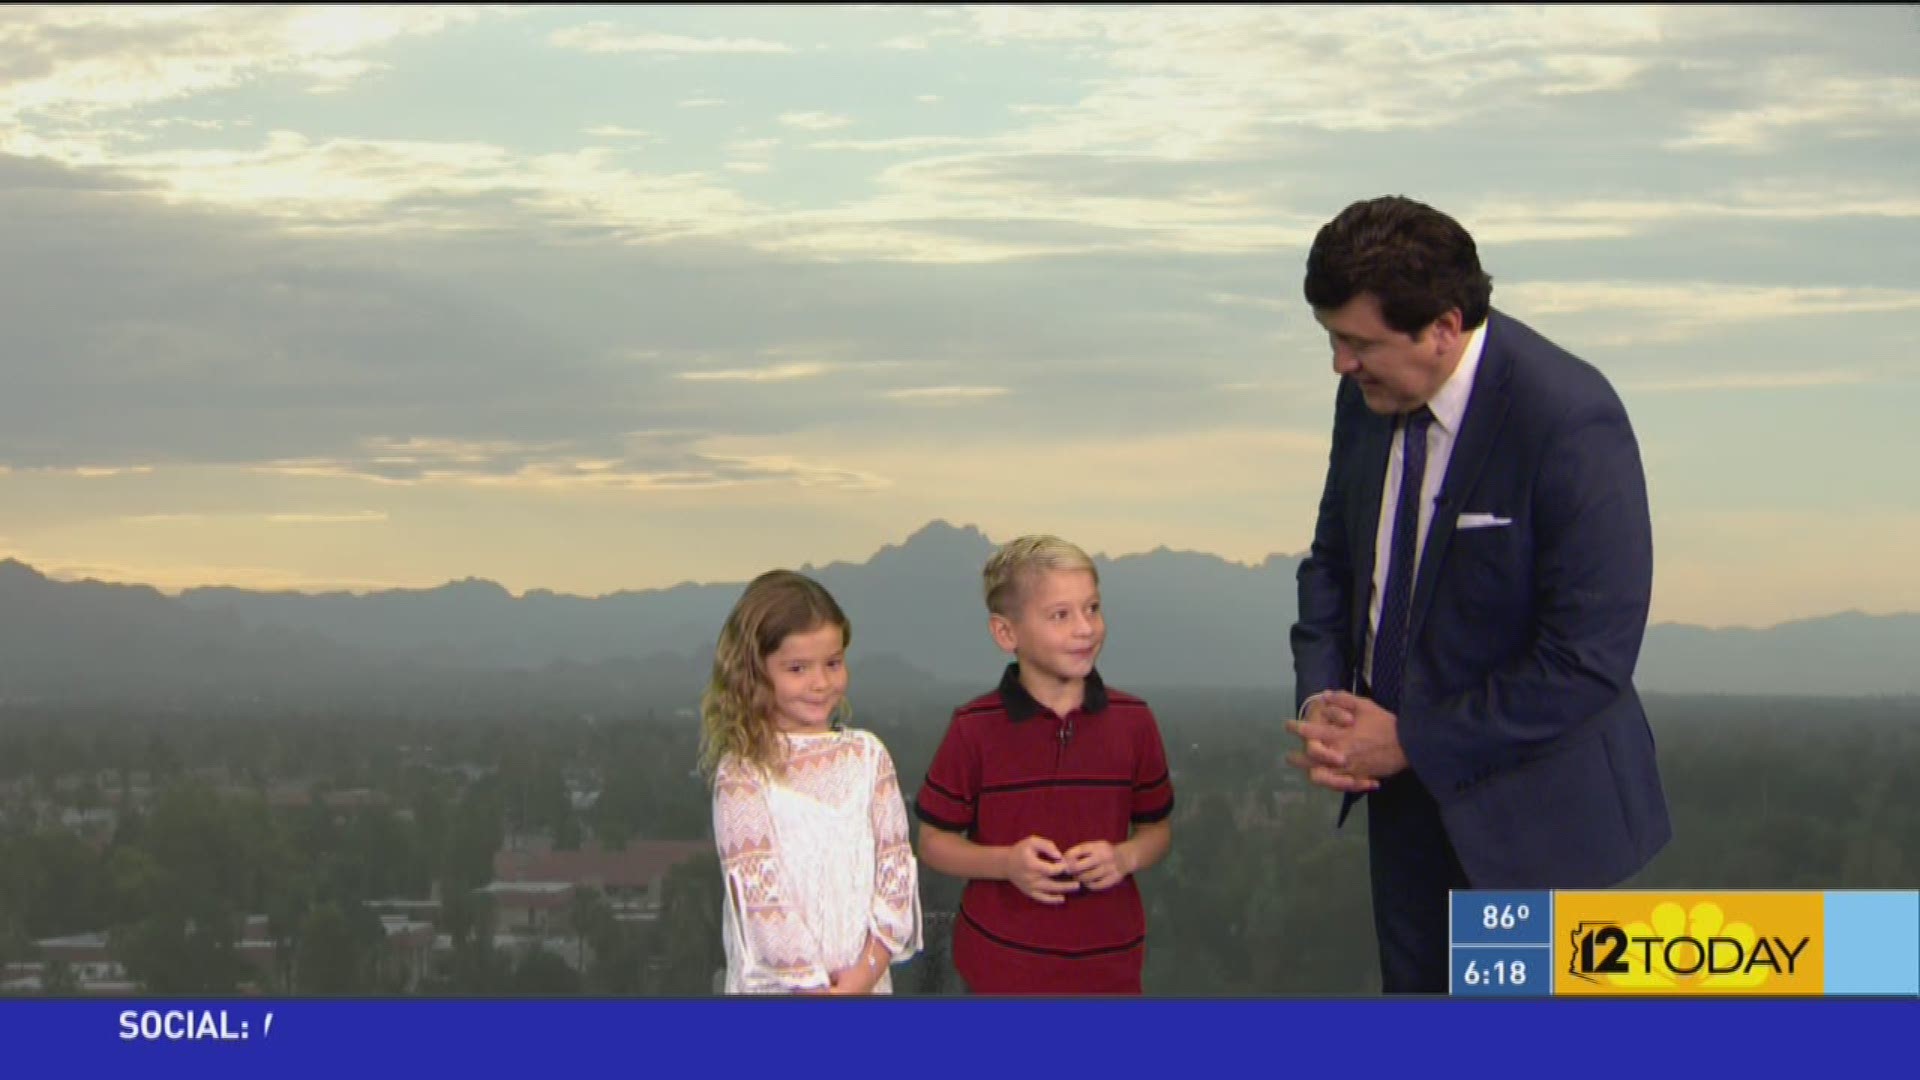 Brother and sister team up to help Jimmy Q. with 7 day forecast